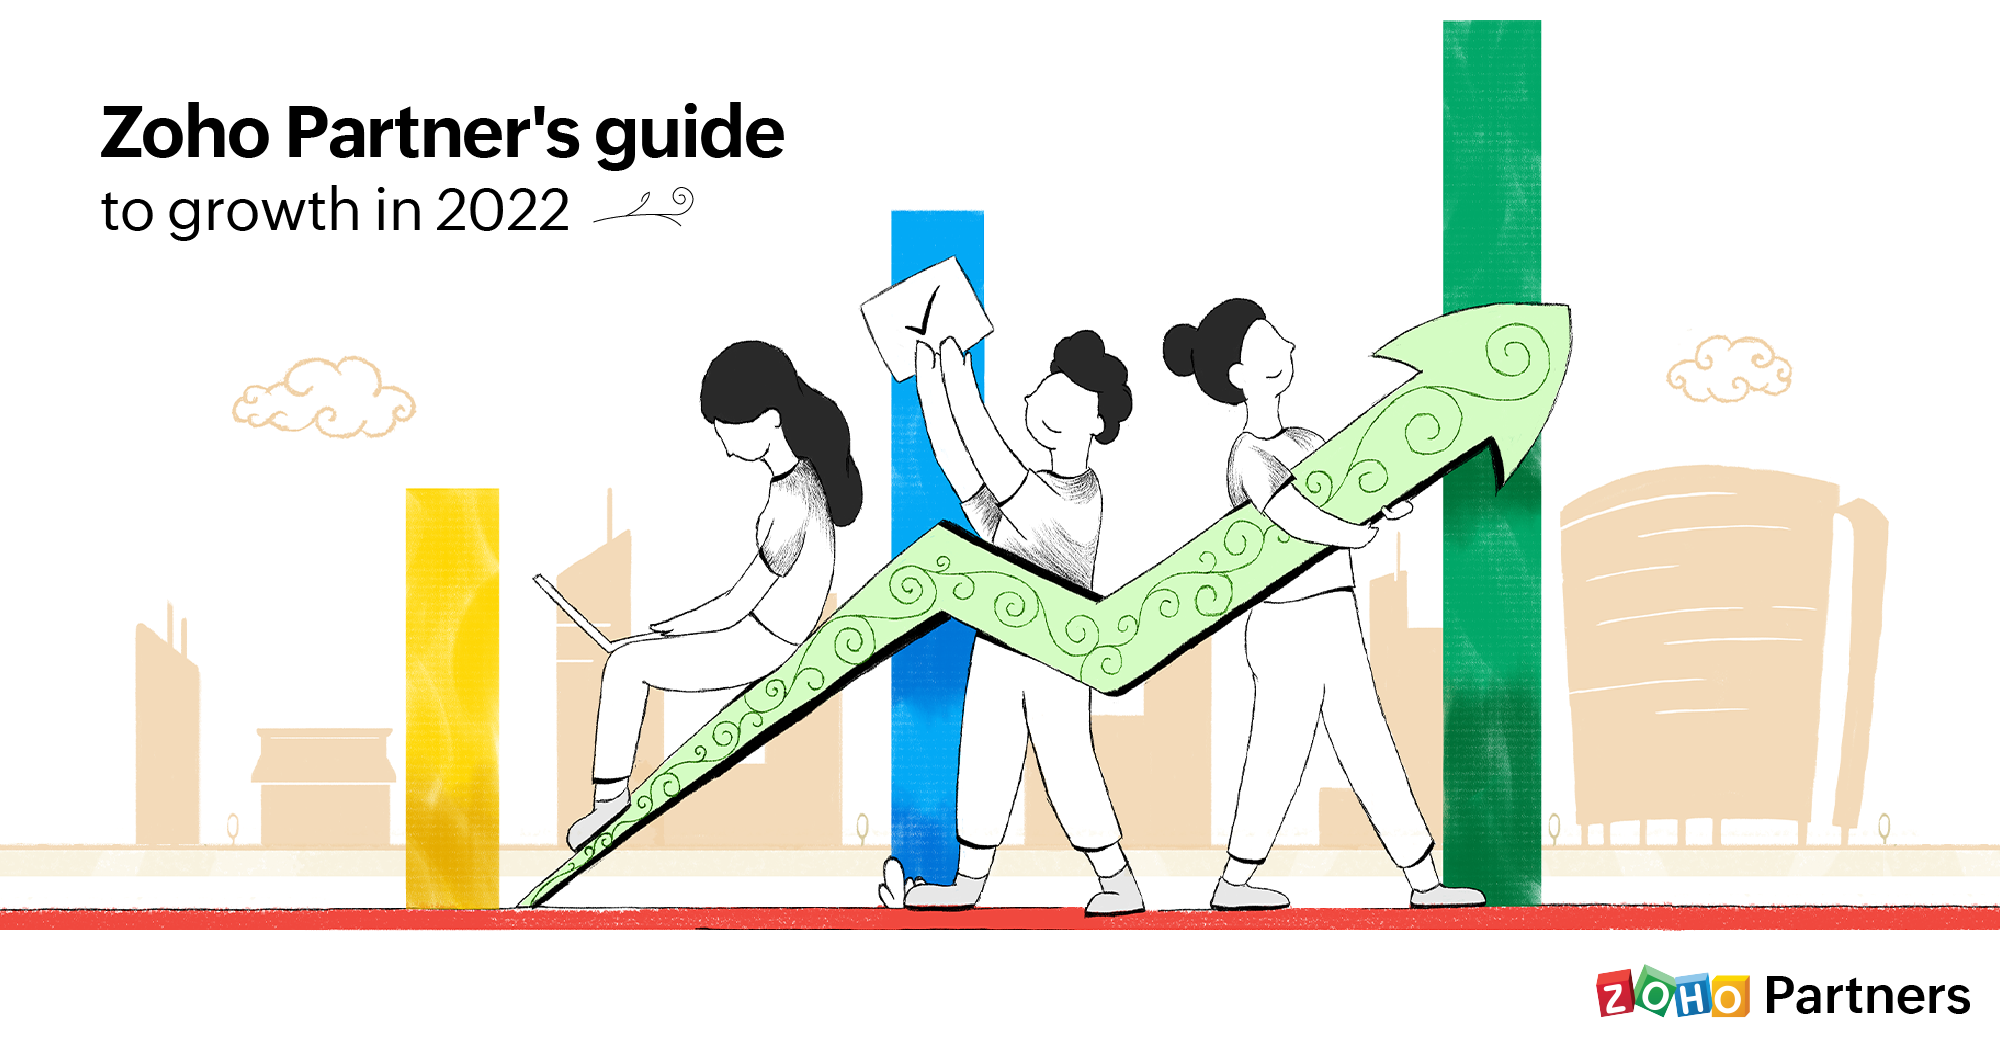 The Zoho Partner’s guide to growth in 2022